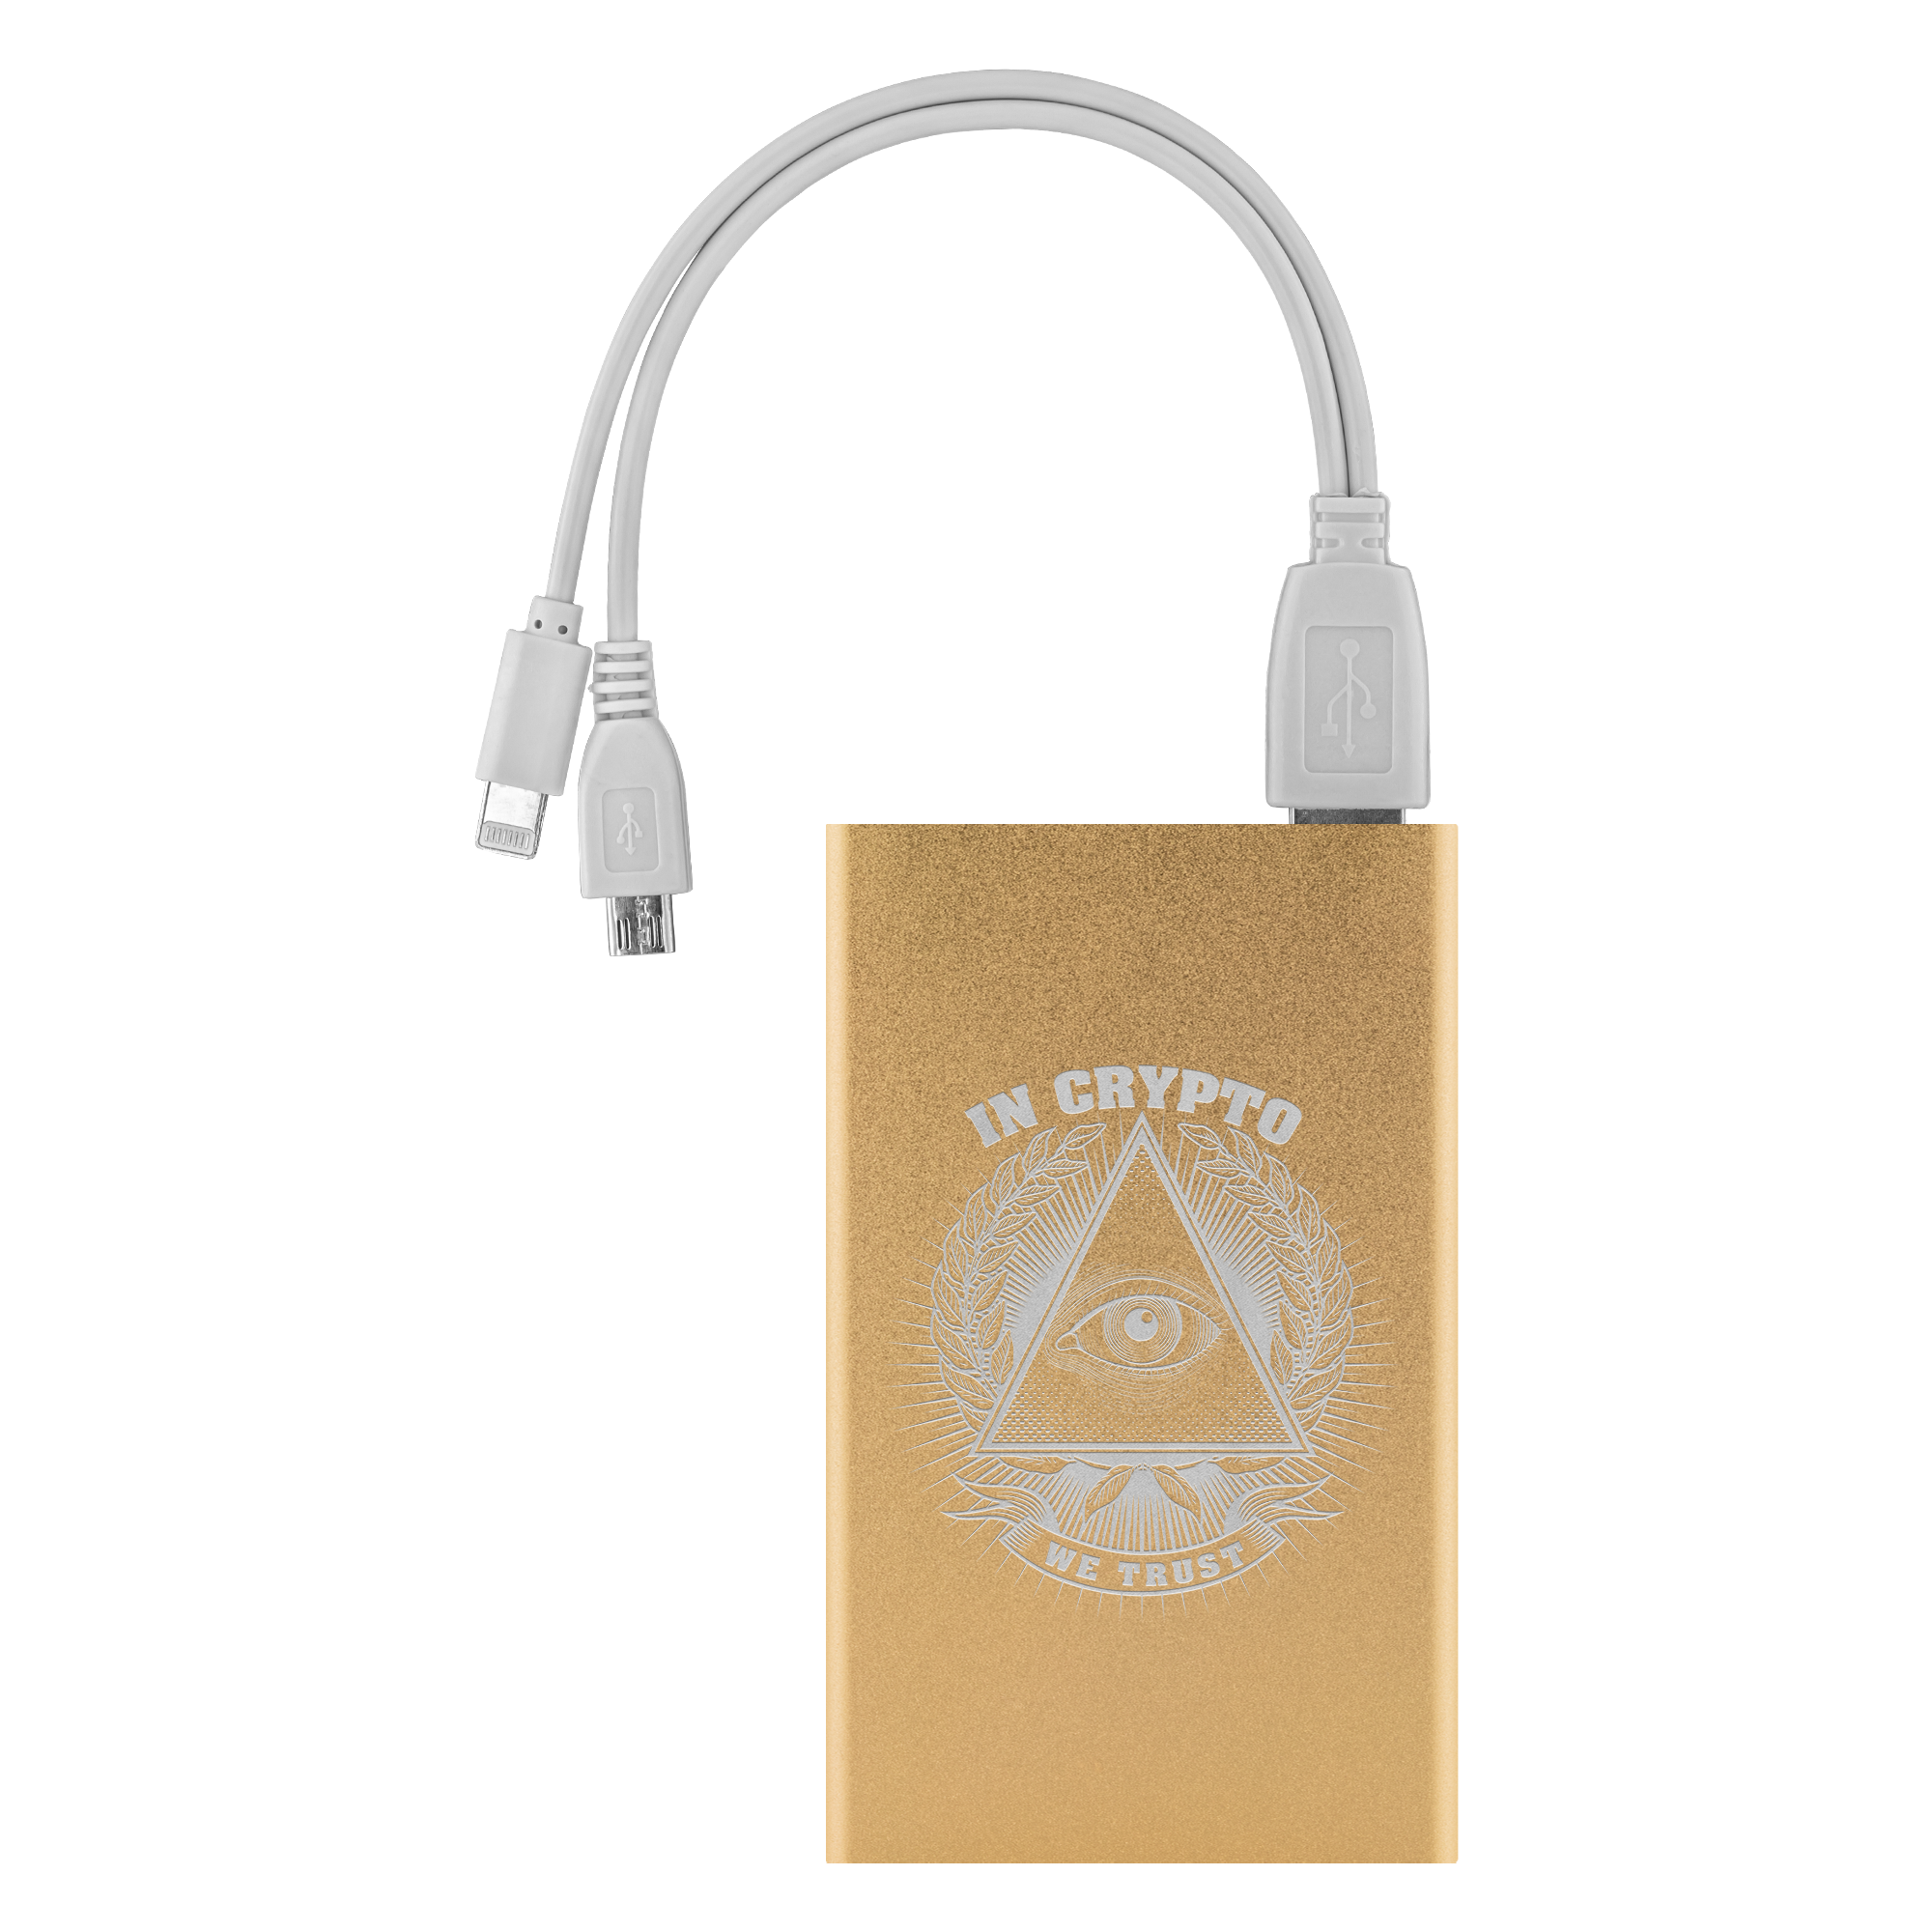 Buy gold Power Bank - In Crypto We Trust